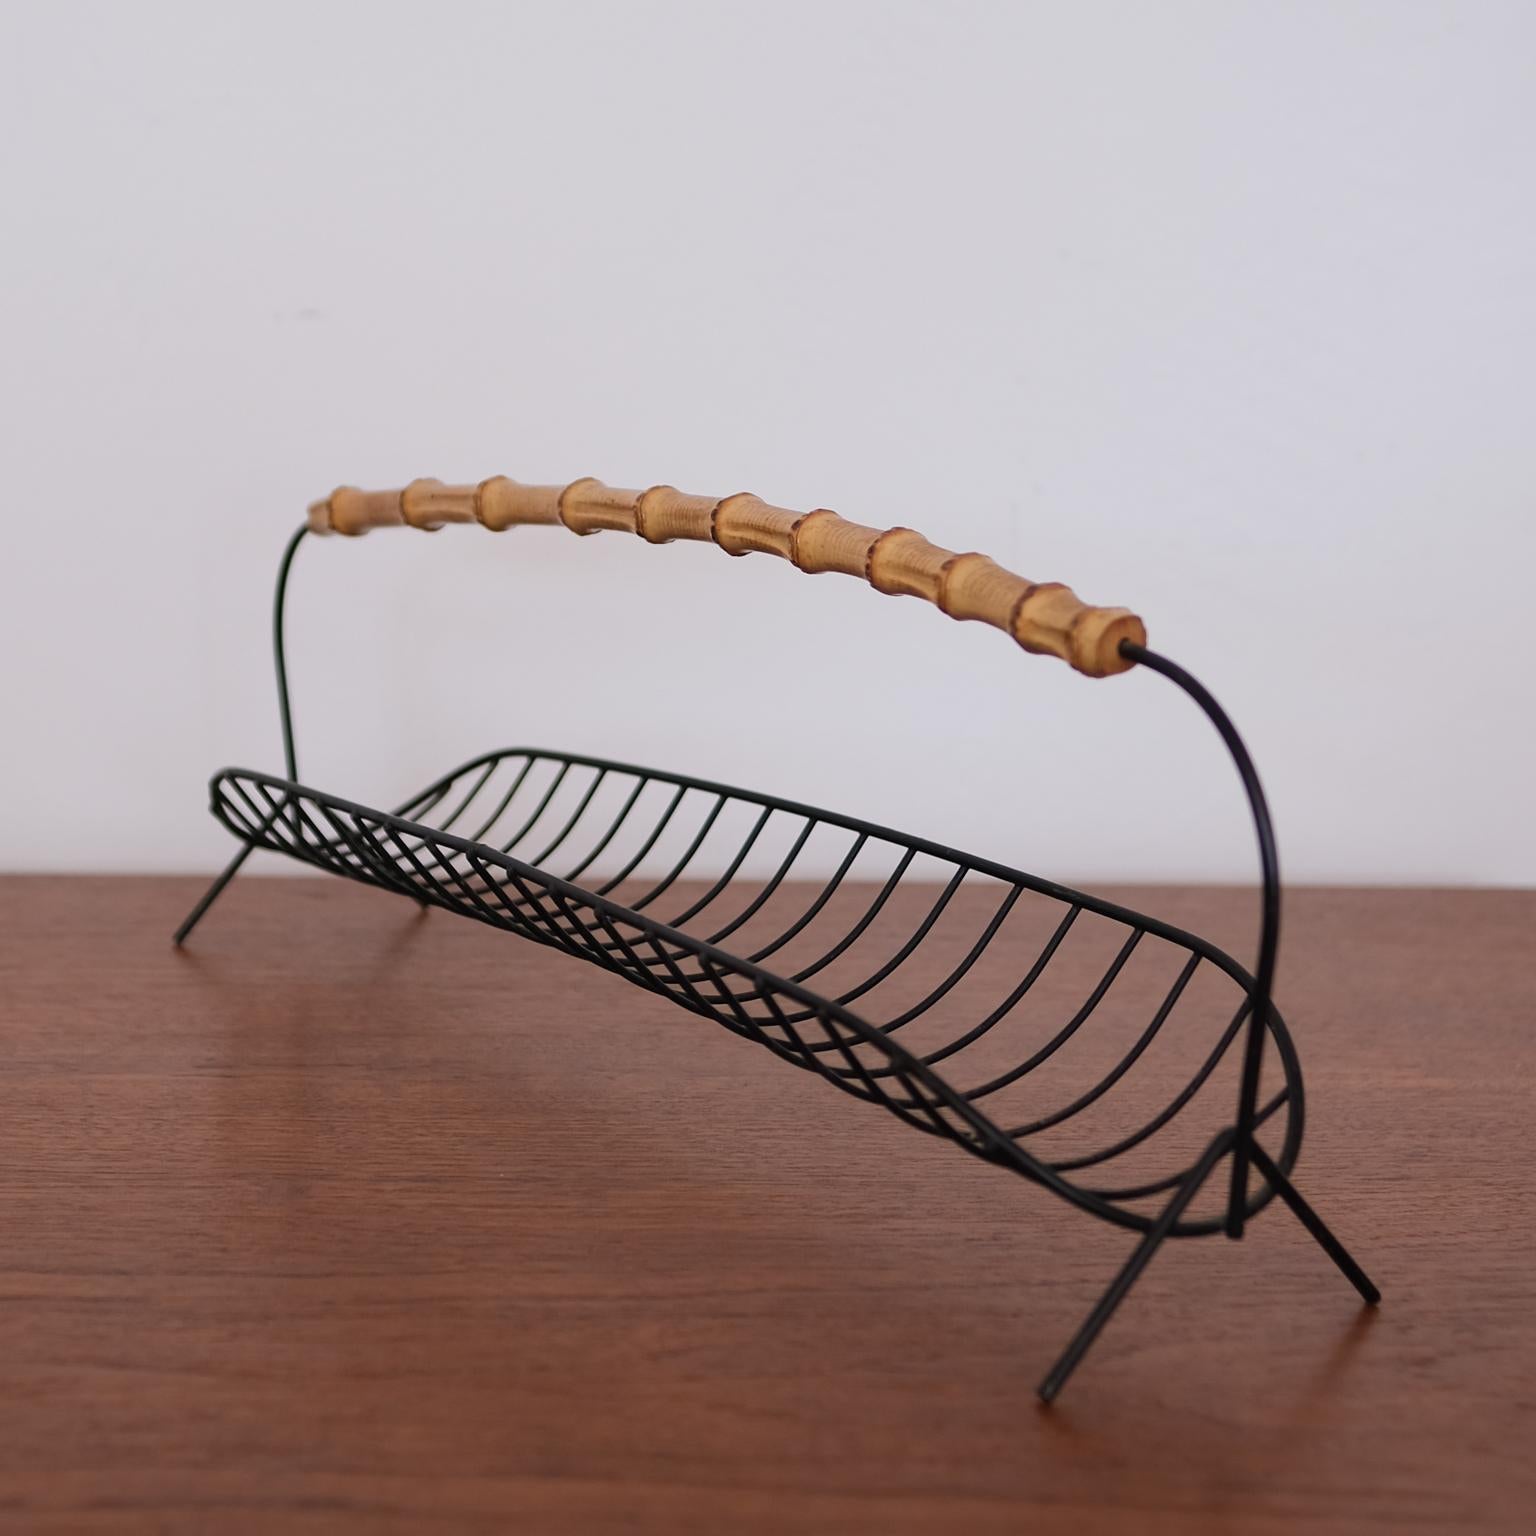 Wire fruit basket with cane handle. 1950s.